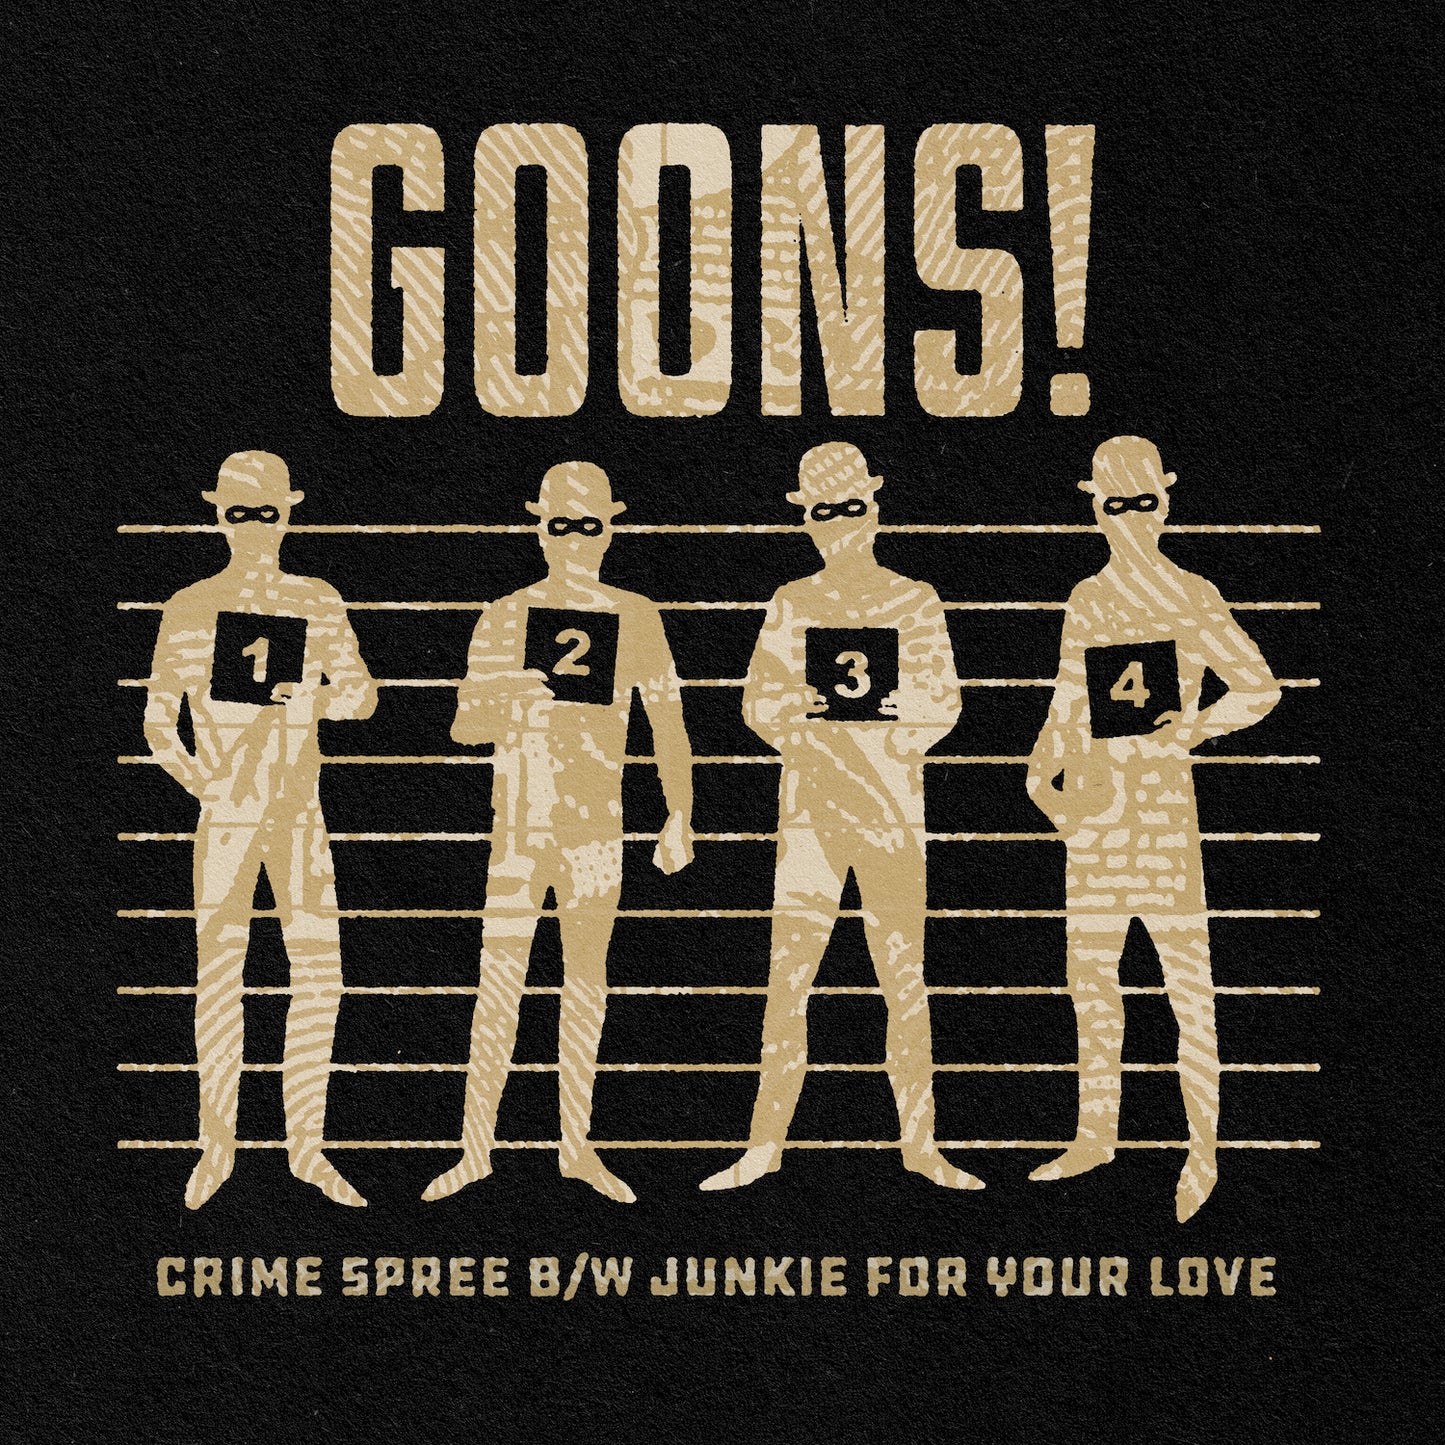 GOONS! "Crime Spree / Junkie For Your Love" Single